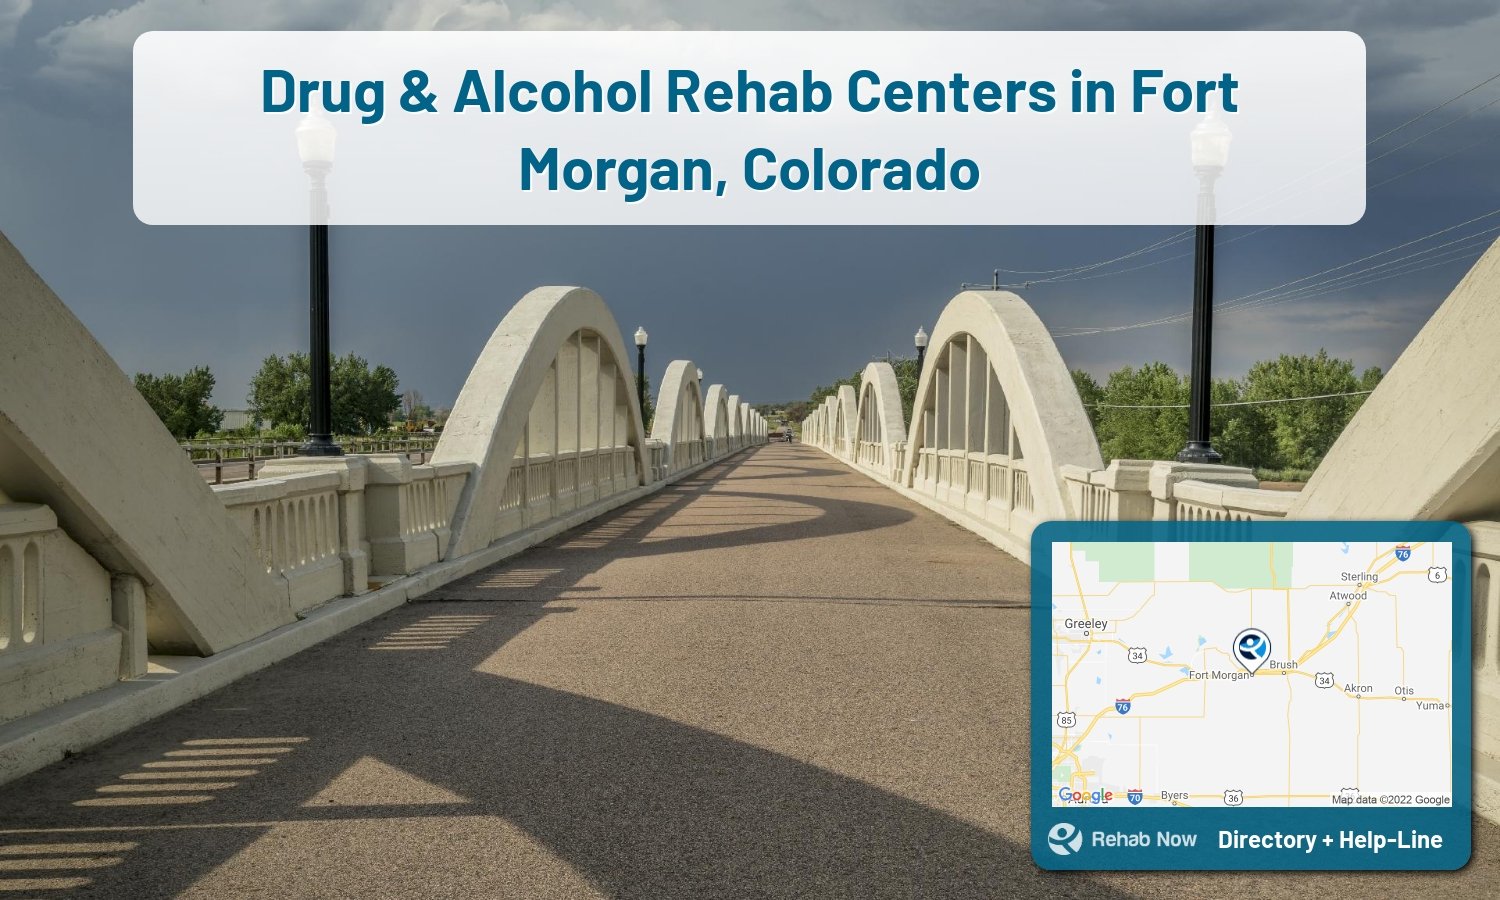 View options, availability, treatment methods, and more, for drug rehab and alcohol treatment in Fort Morgan, Colorado